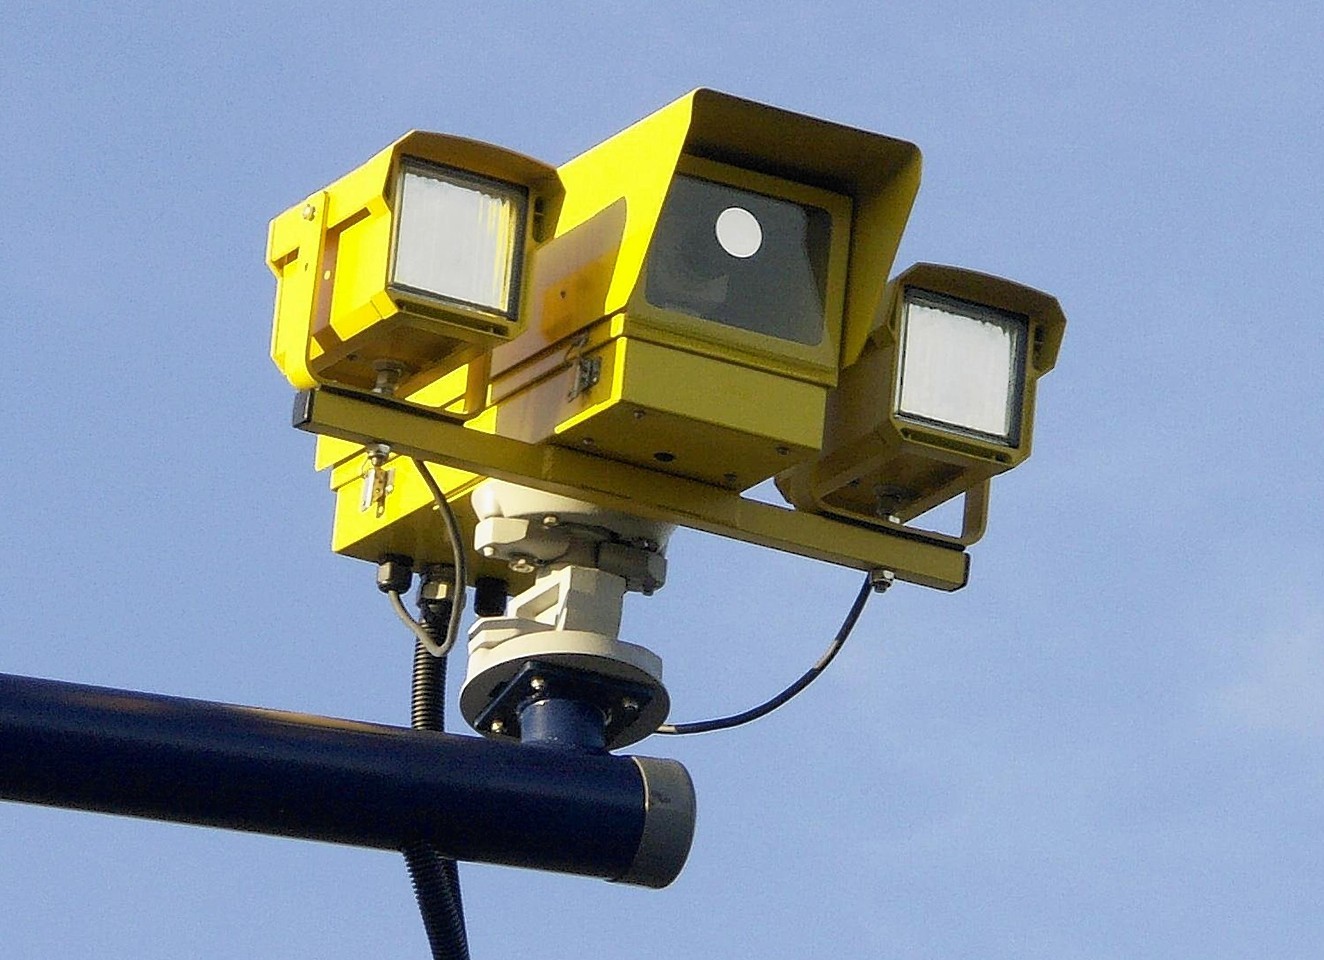 The A90 average speed cameras